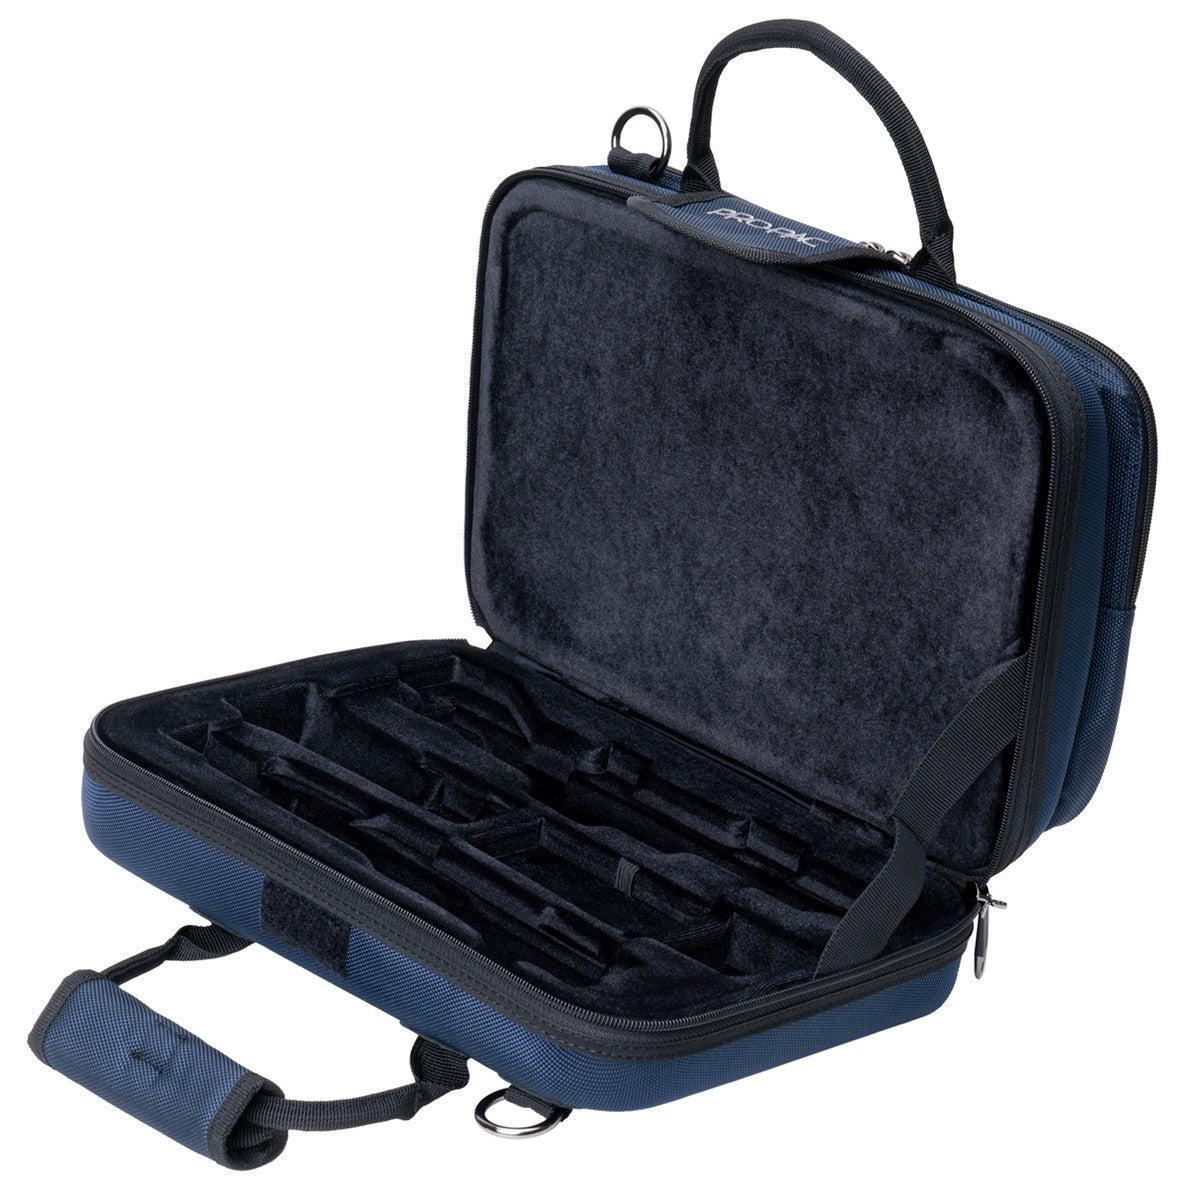 Protec Pro Pac Oboe Case PB315-Andy's Music